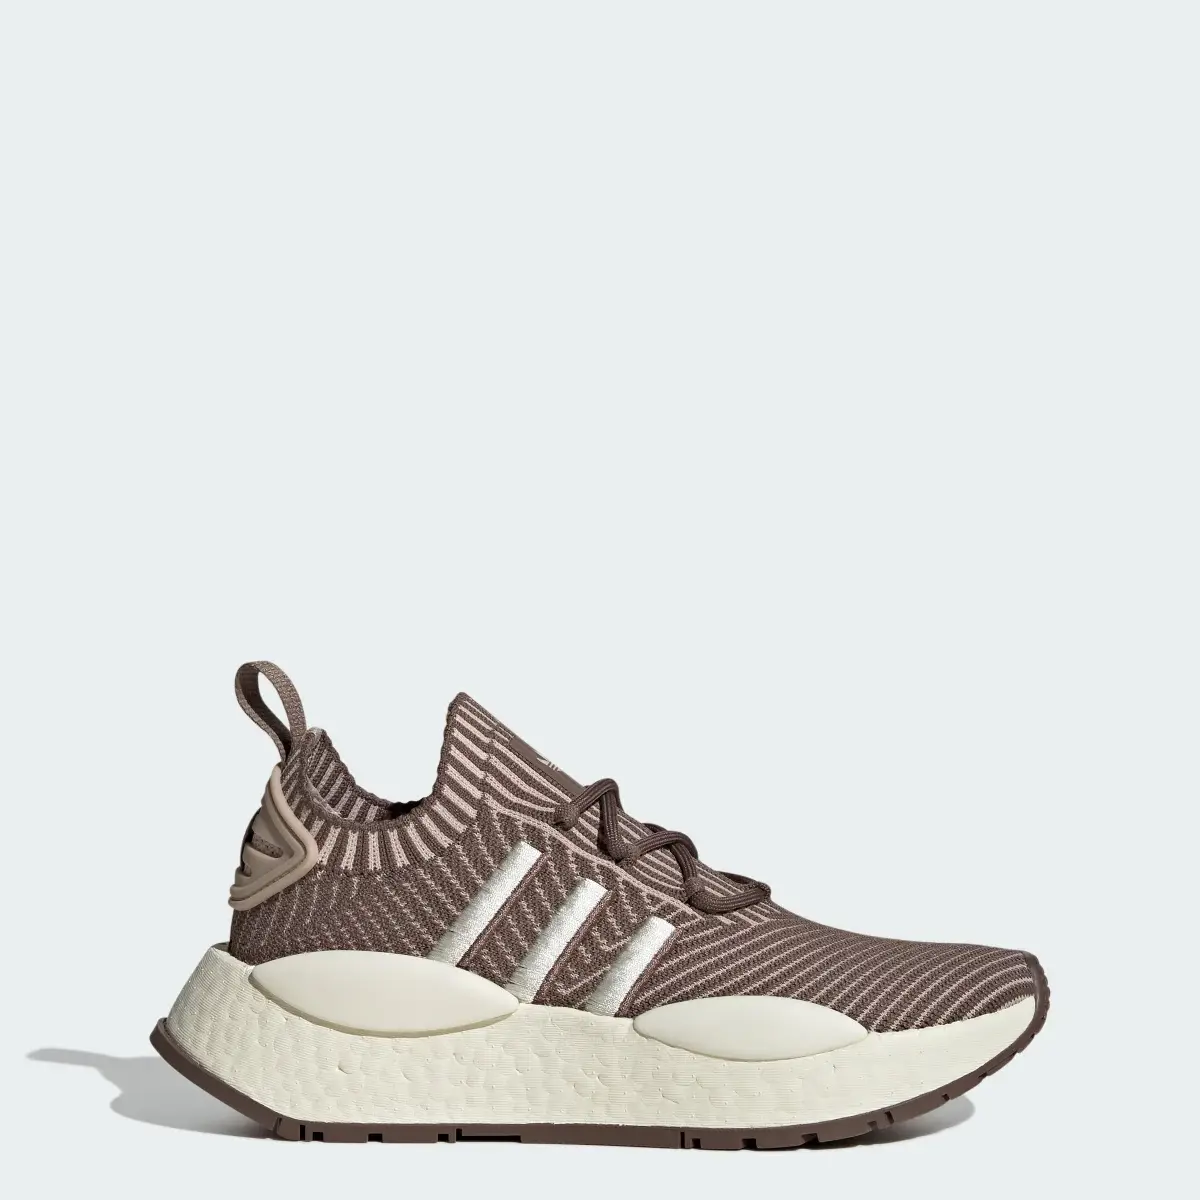 Adidas NMD_W1 Shoes. 1